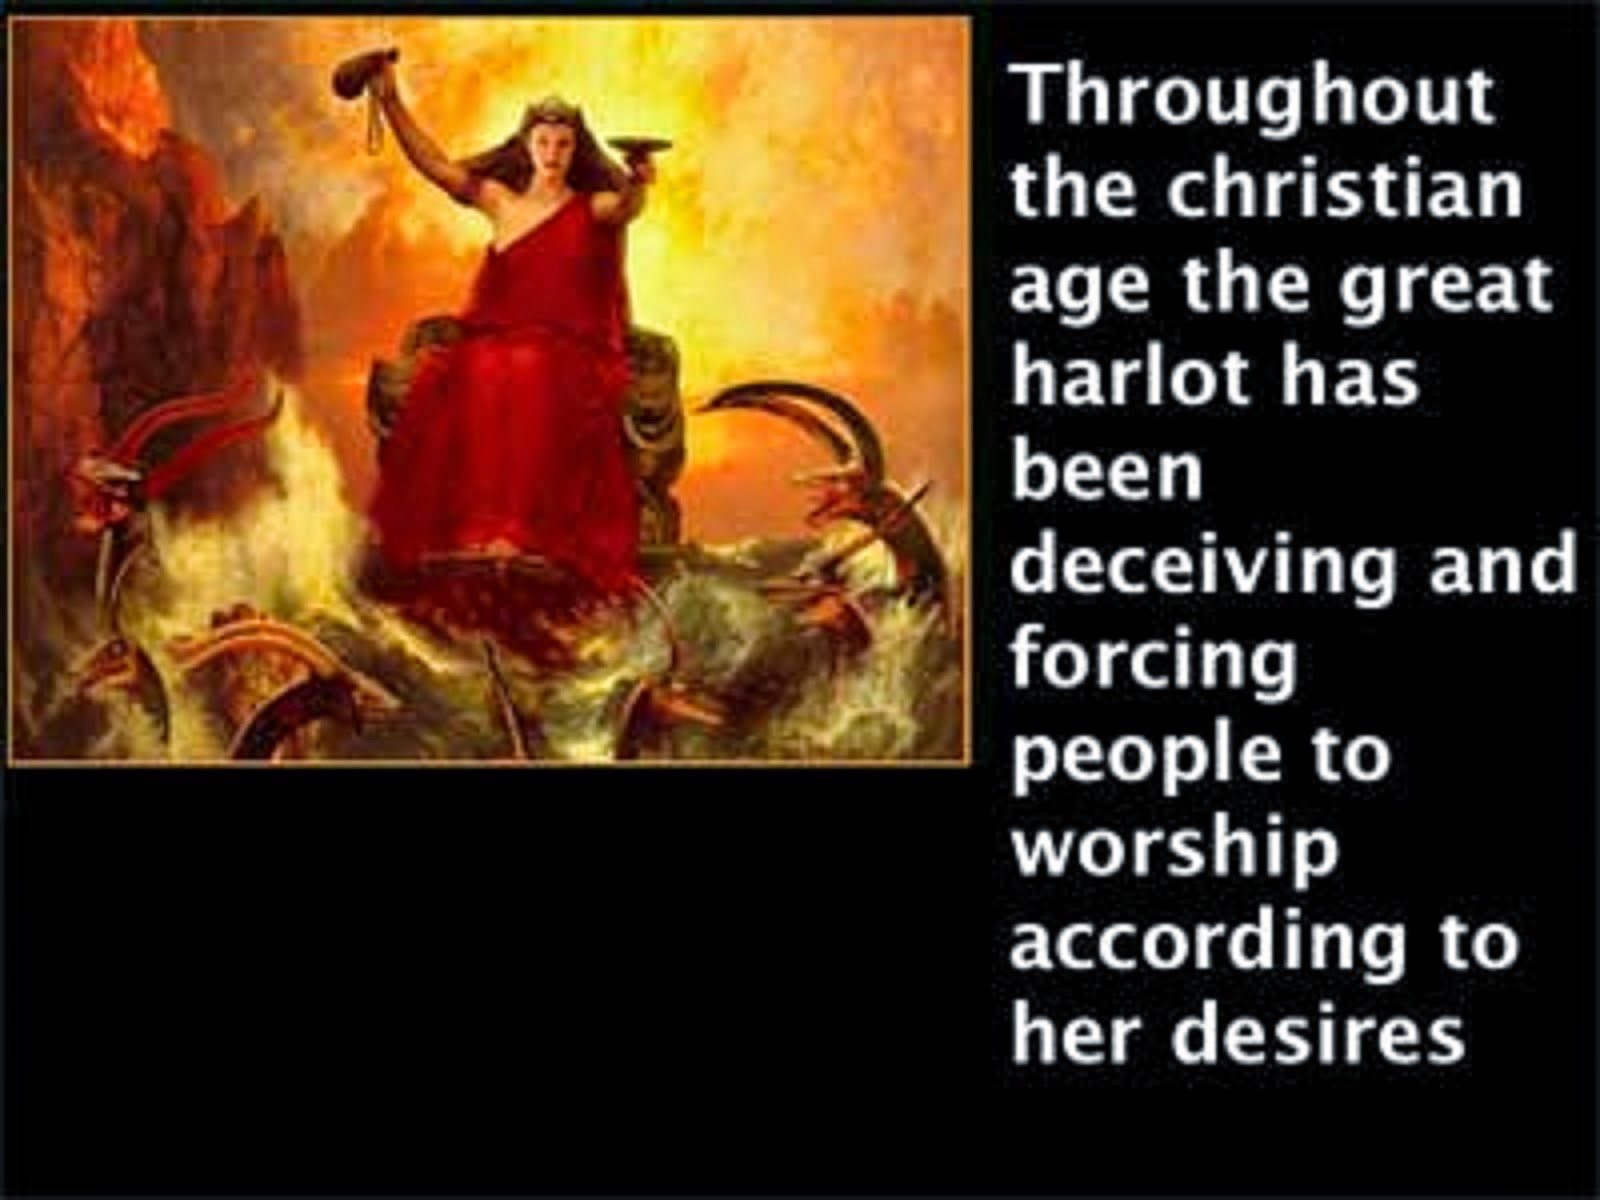 THE GREAT HARLOT - THE CATHOLIC AND NOW PROTESTANT WHORE